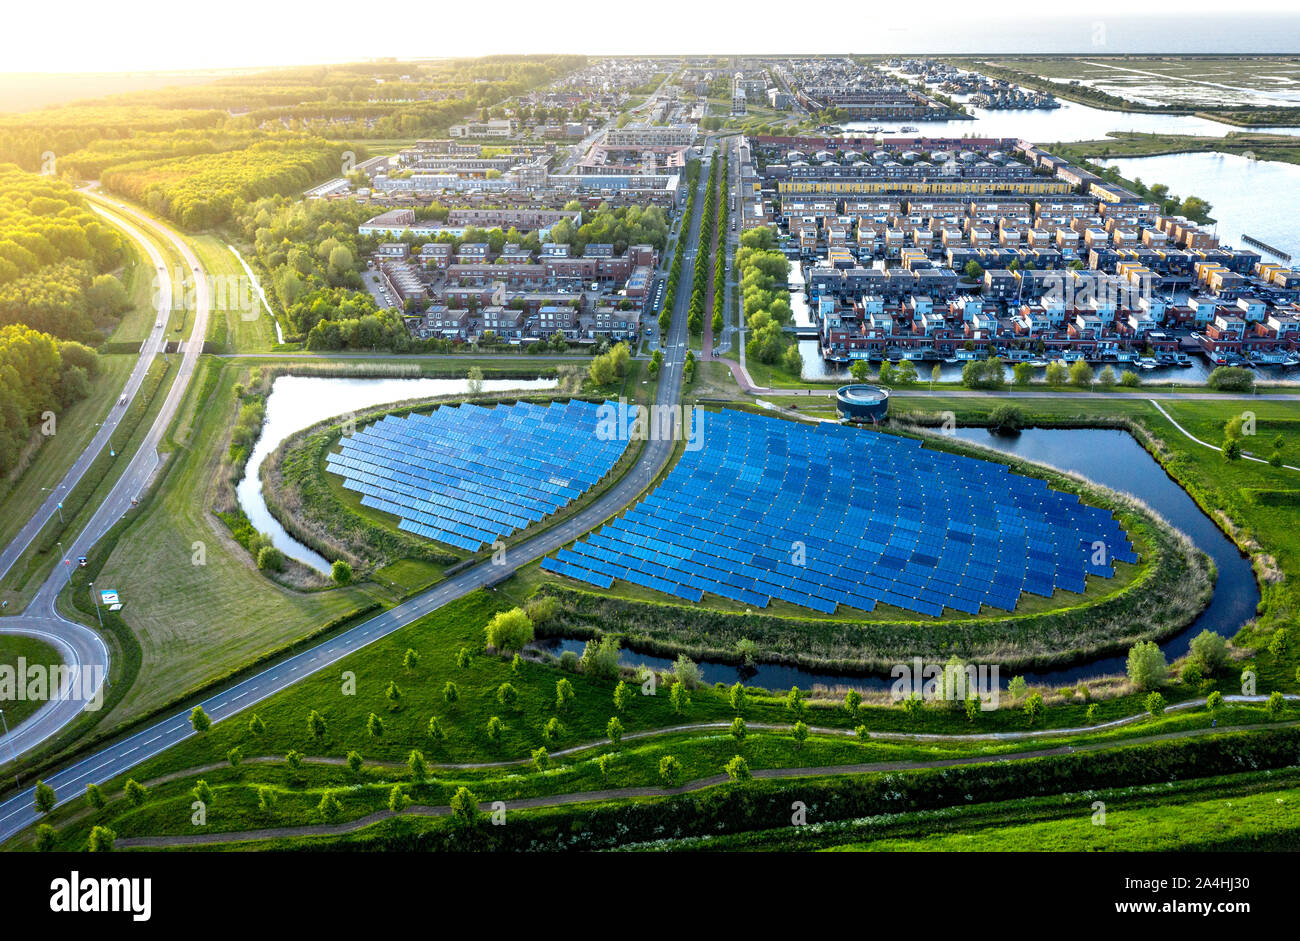 Modern sustainable neighbourhood in Almere, The Netherlands. The city heating (stadswarmte) in the district is partially powered by a solar panel isla Stock Photo